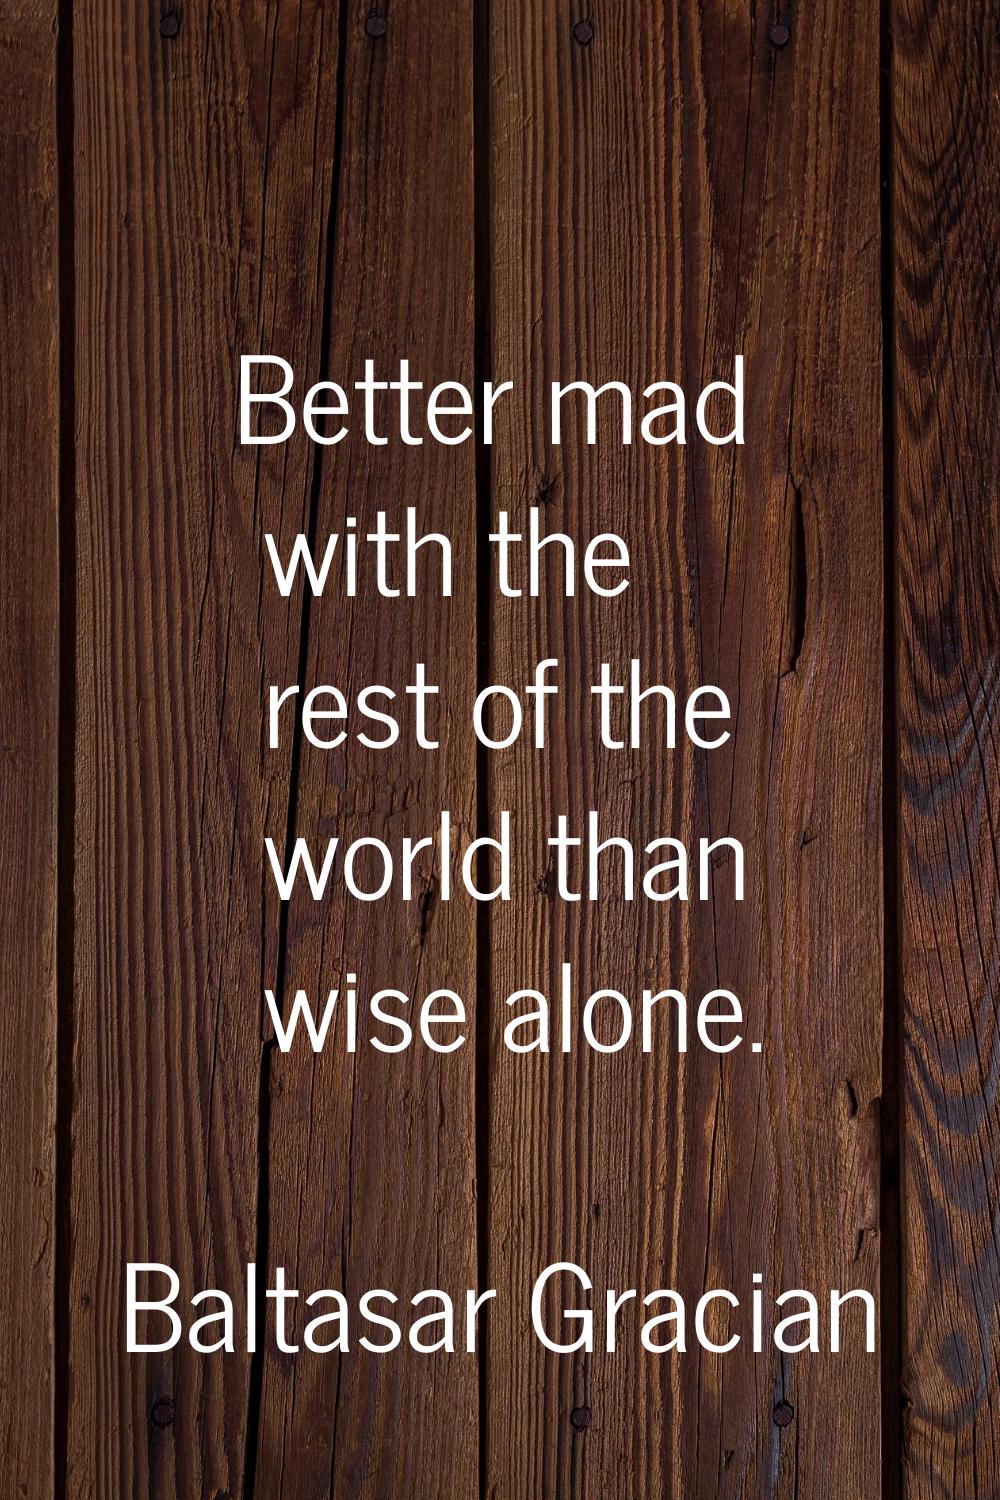 Better mad with the rest of the world than wise alone.